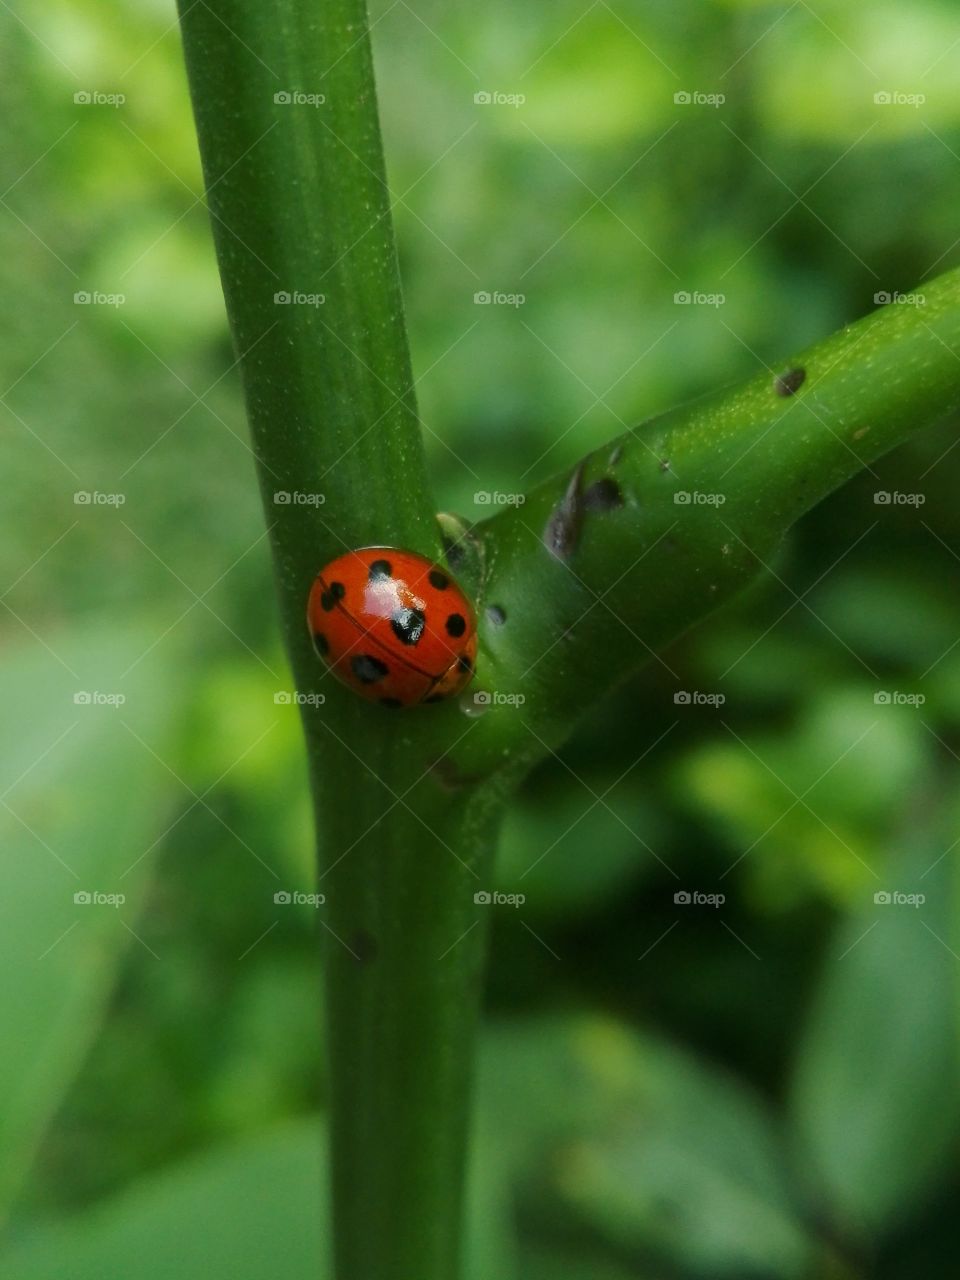 A pretty ladybug resting on a stem. The polka dots looks good on her.